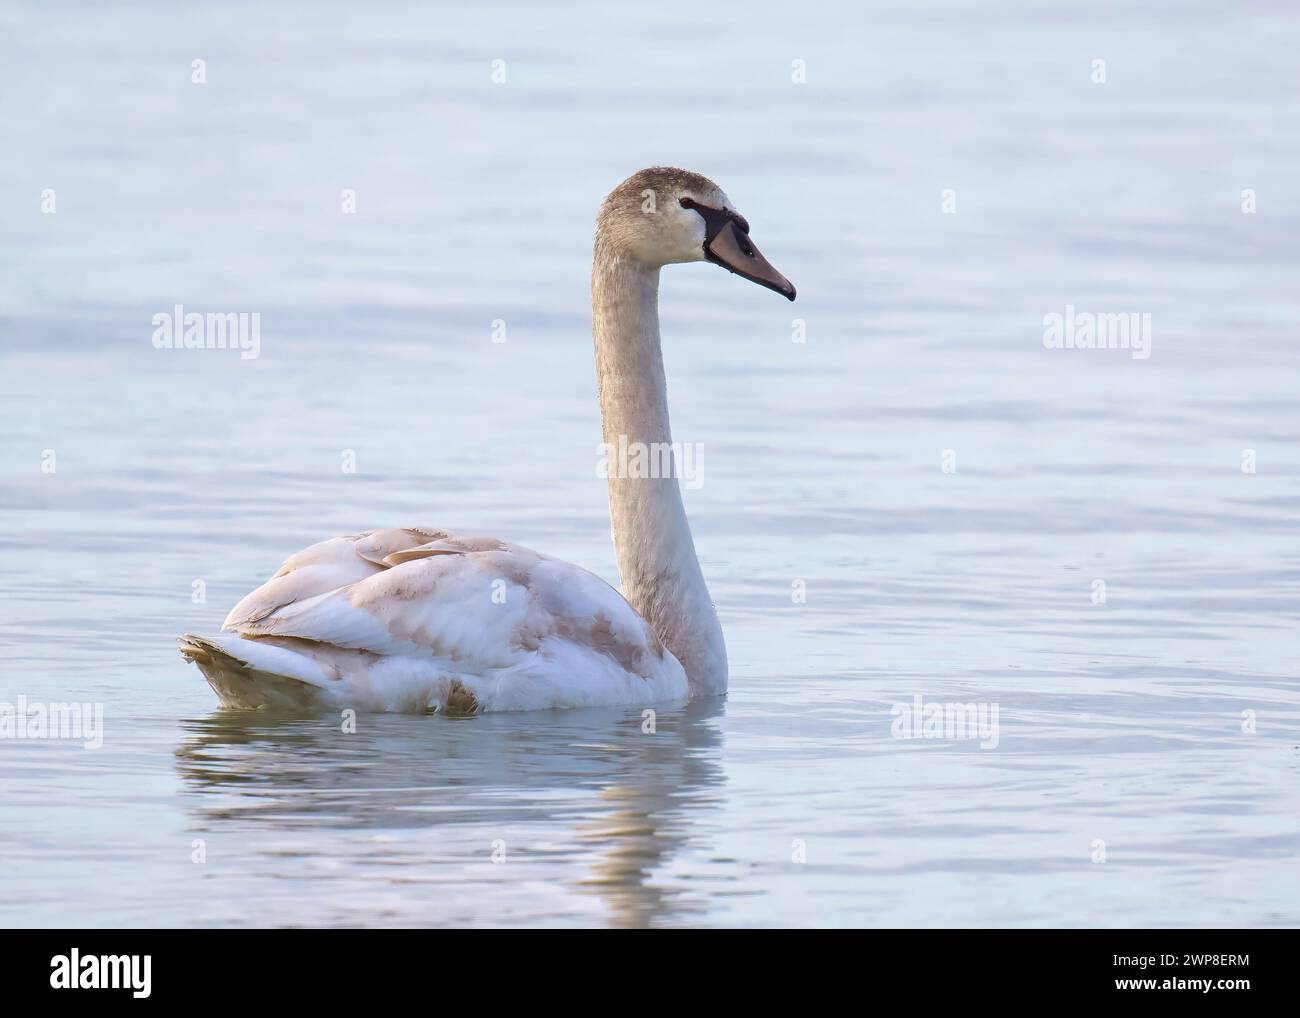 A serene Trumpeter Swan resting in calm waters on a peaceful day Stock Photo